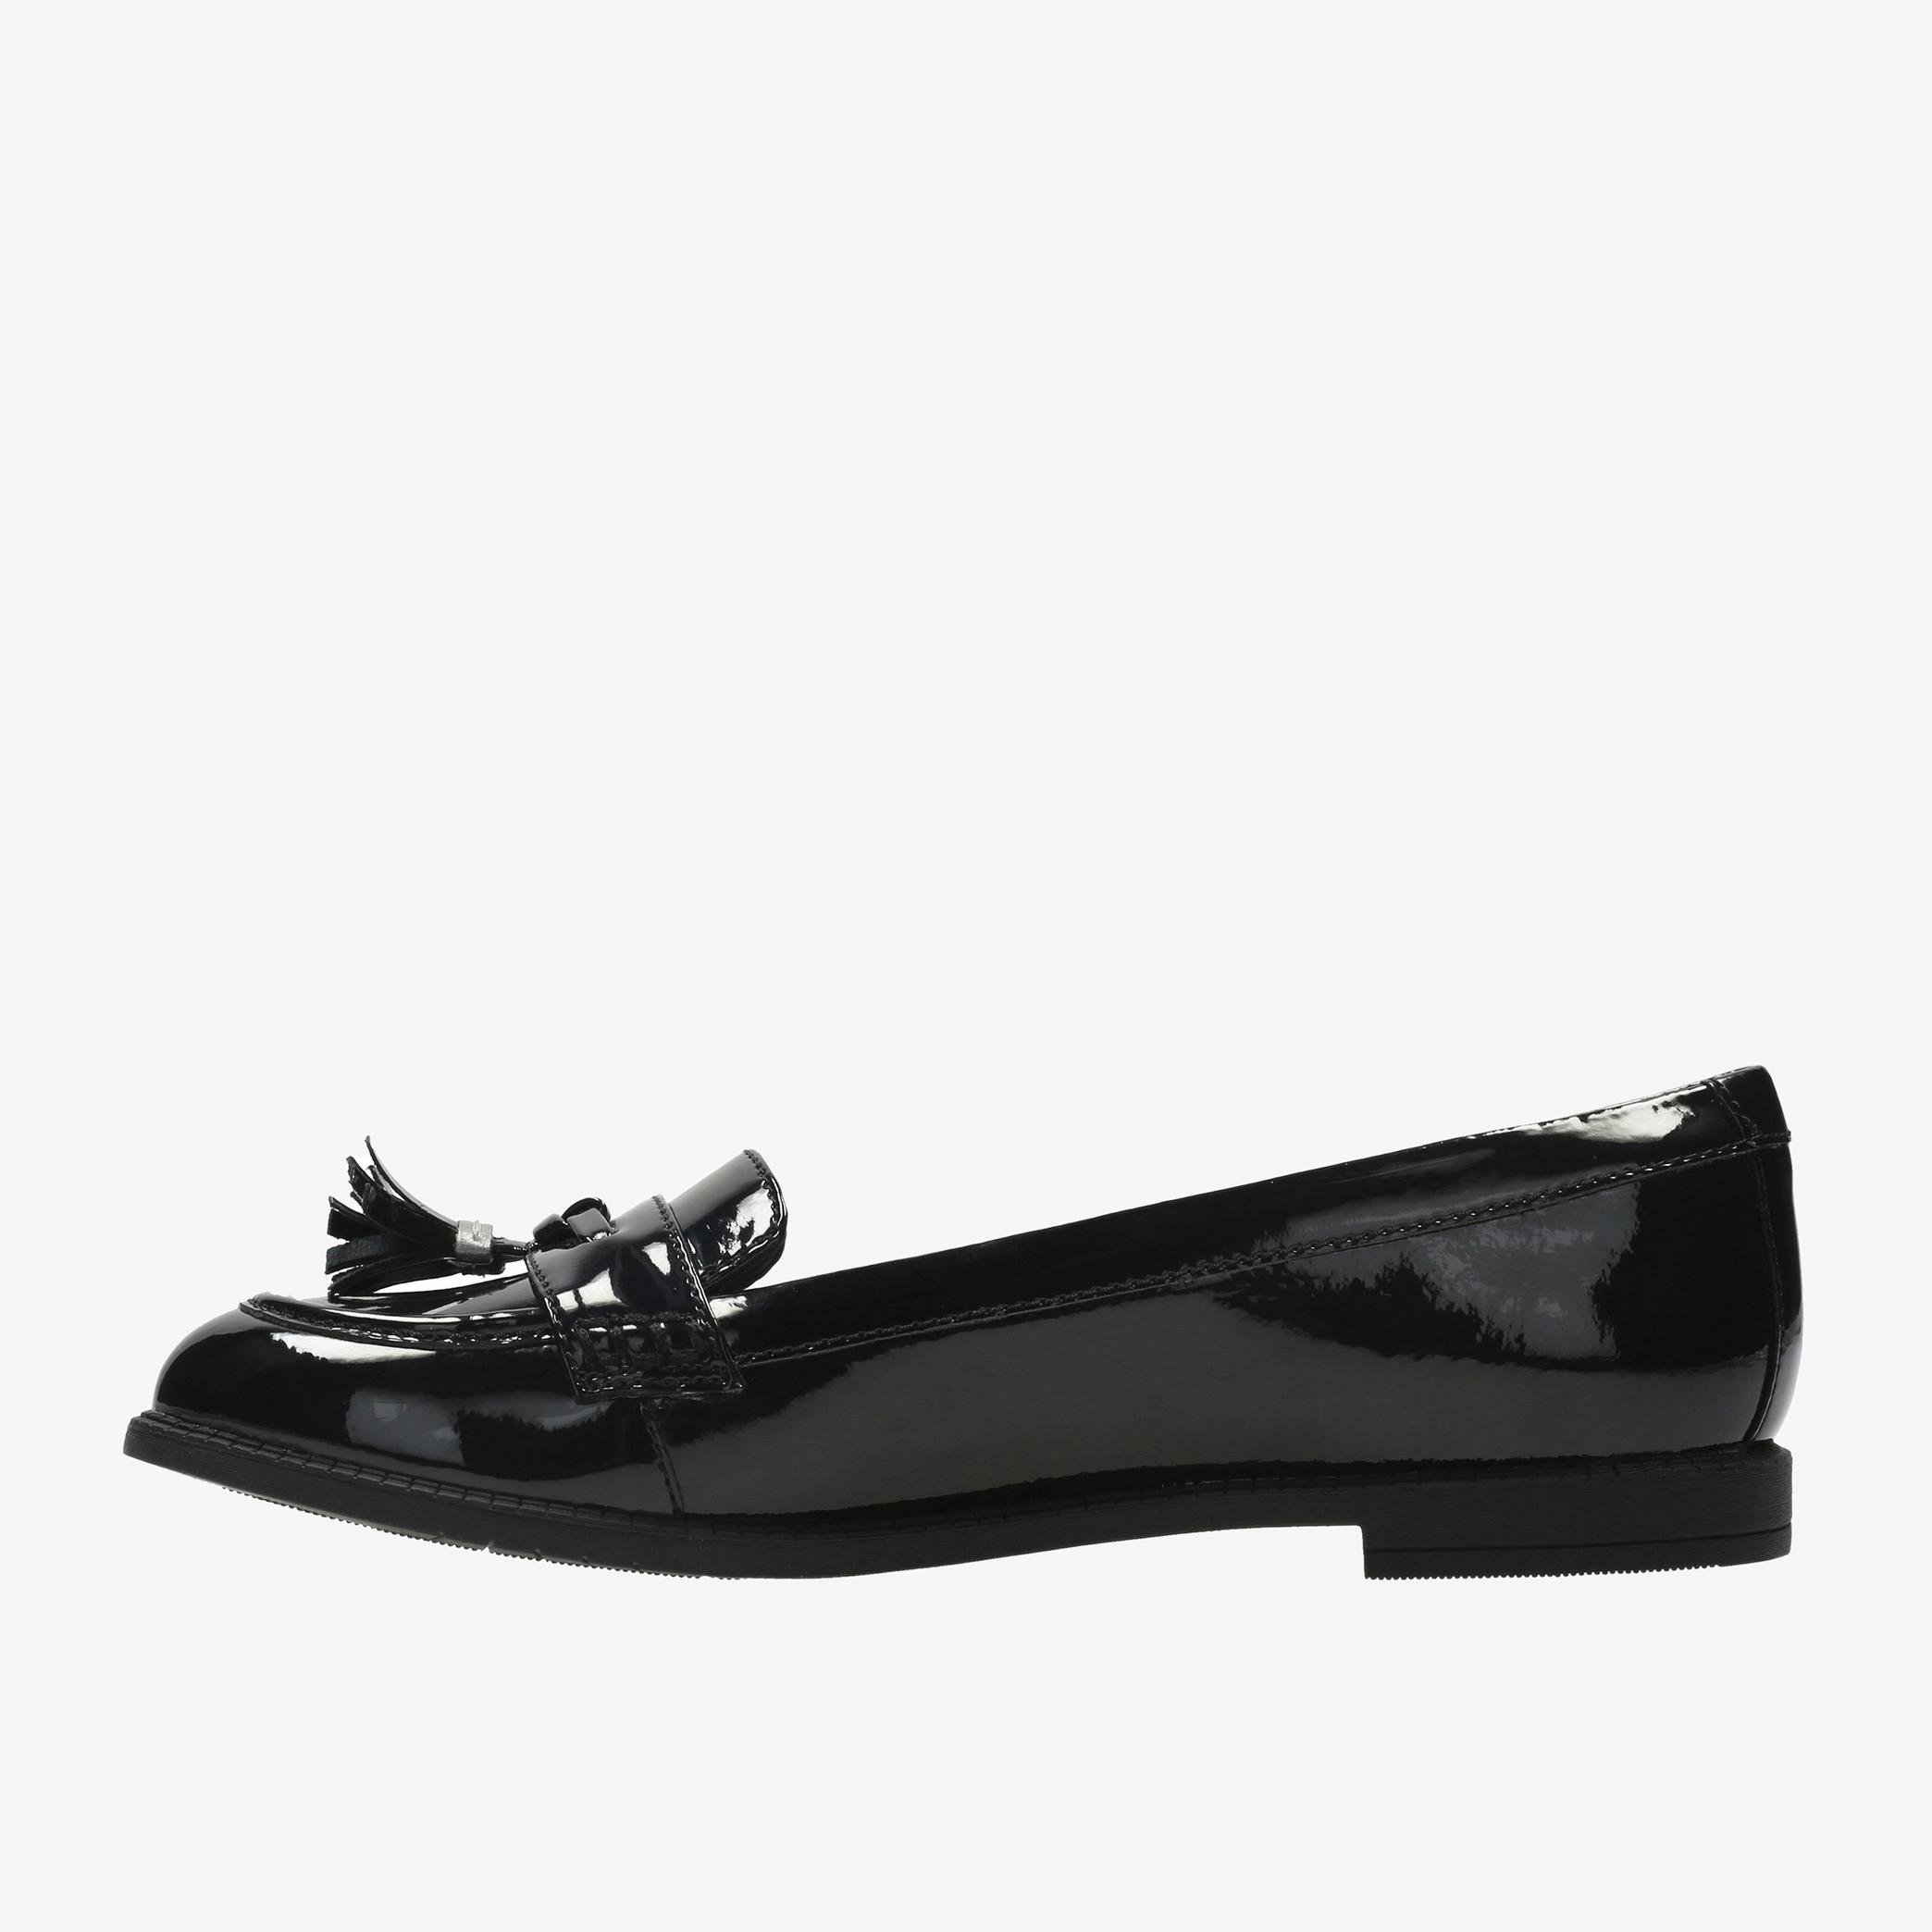 Preppy Edge Youth Black Patent Loafers, view 2 of 6